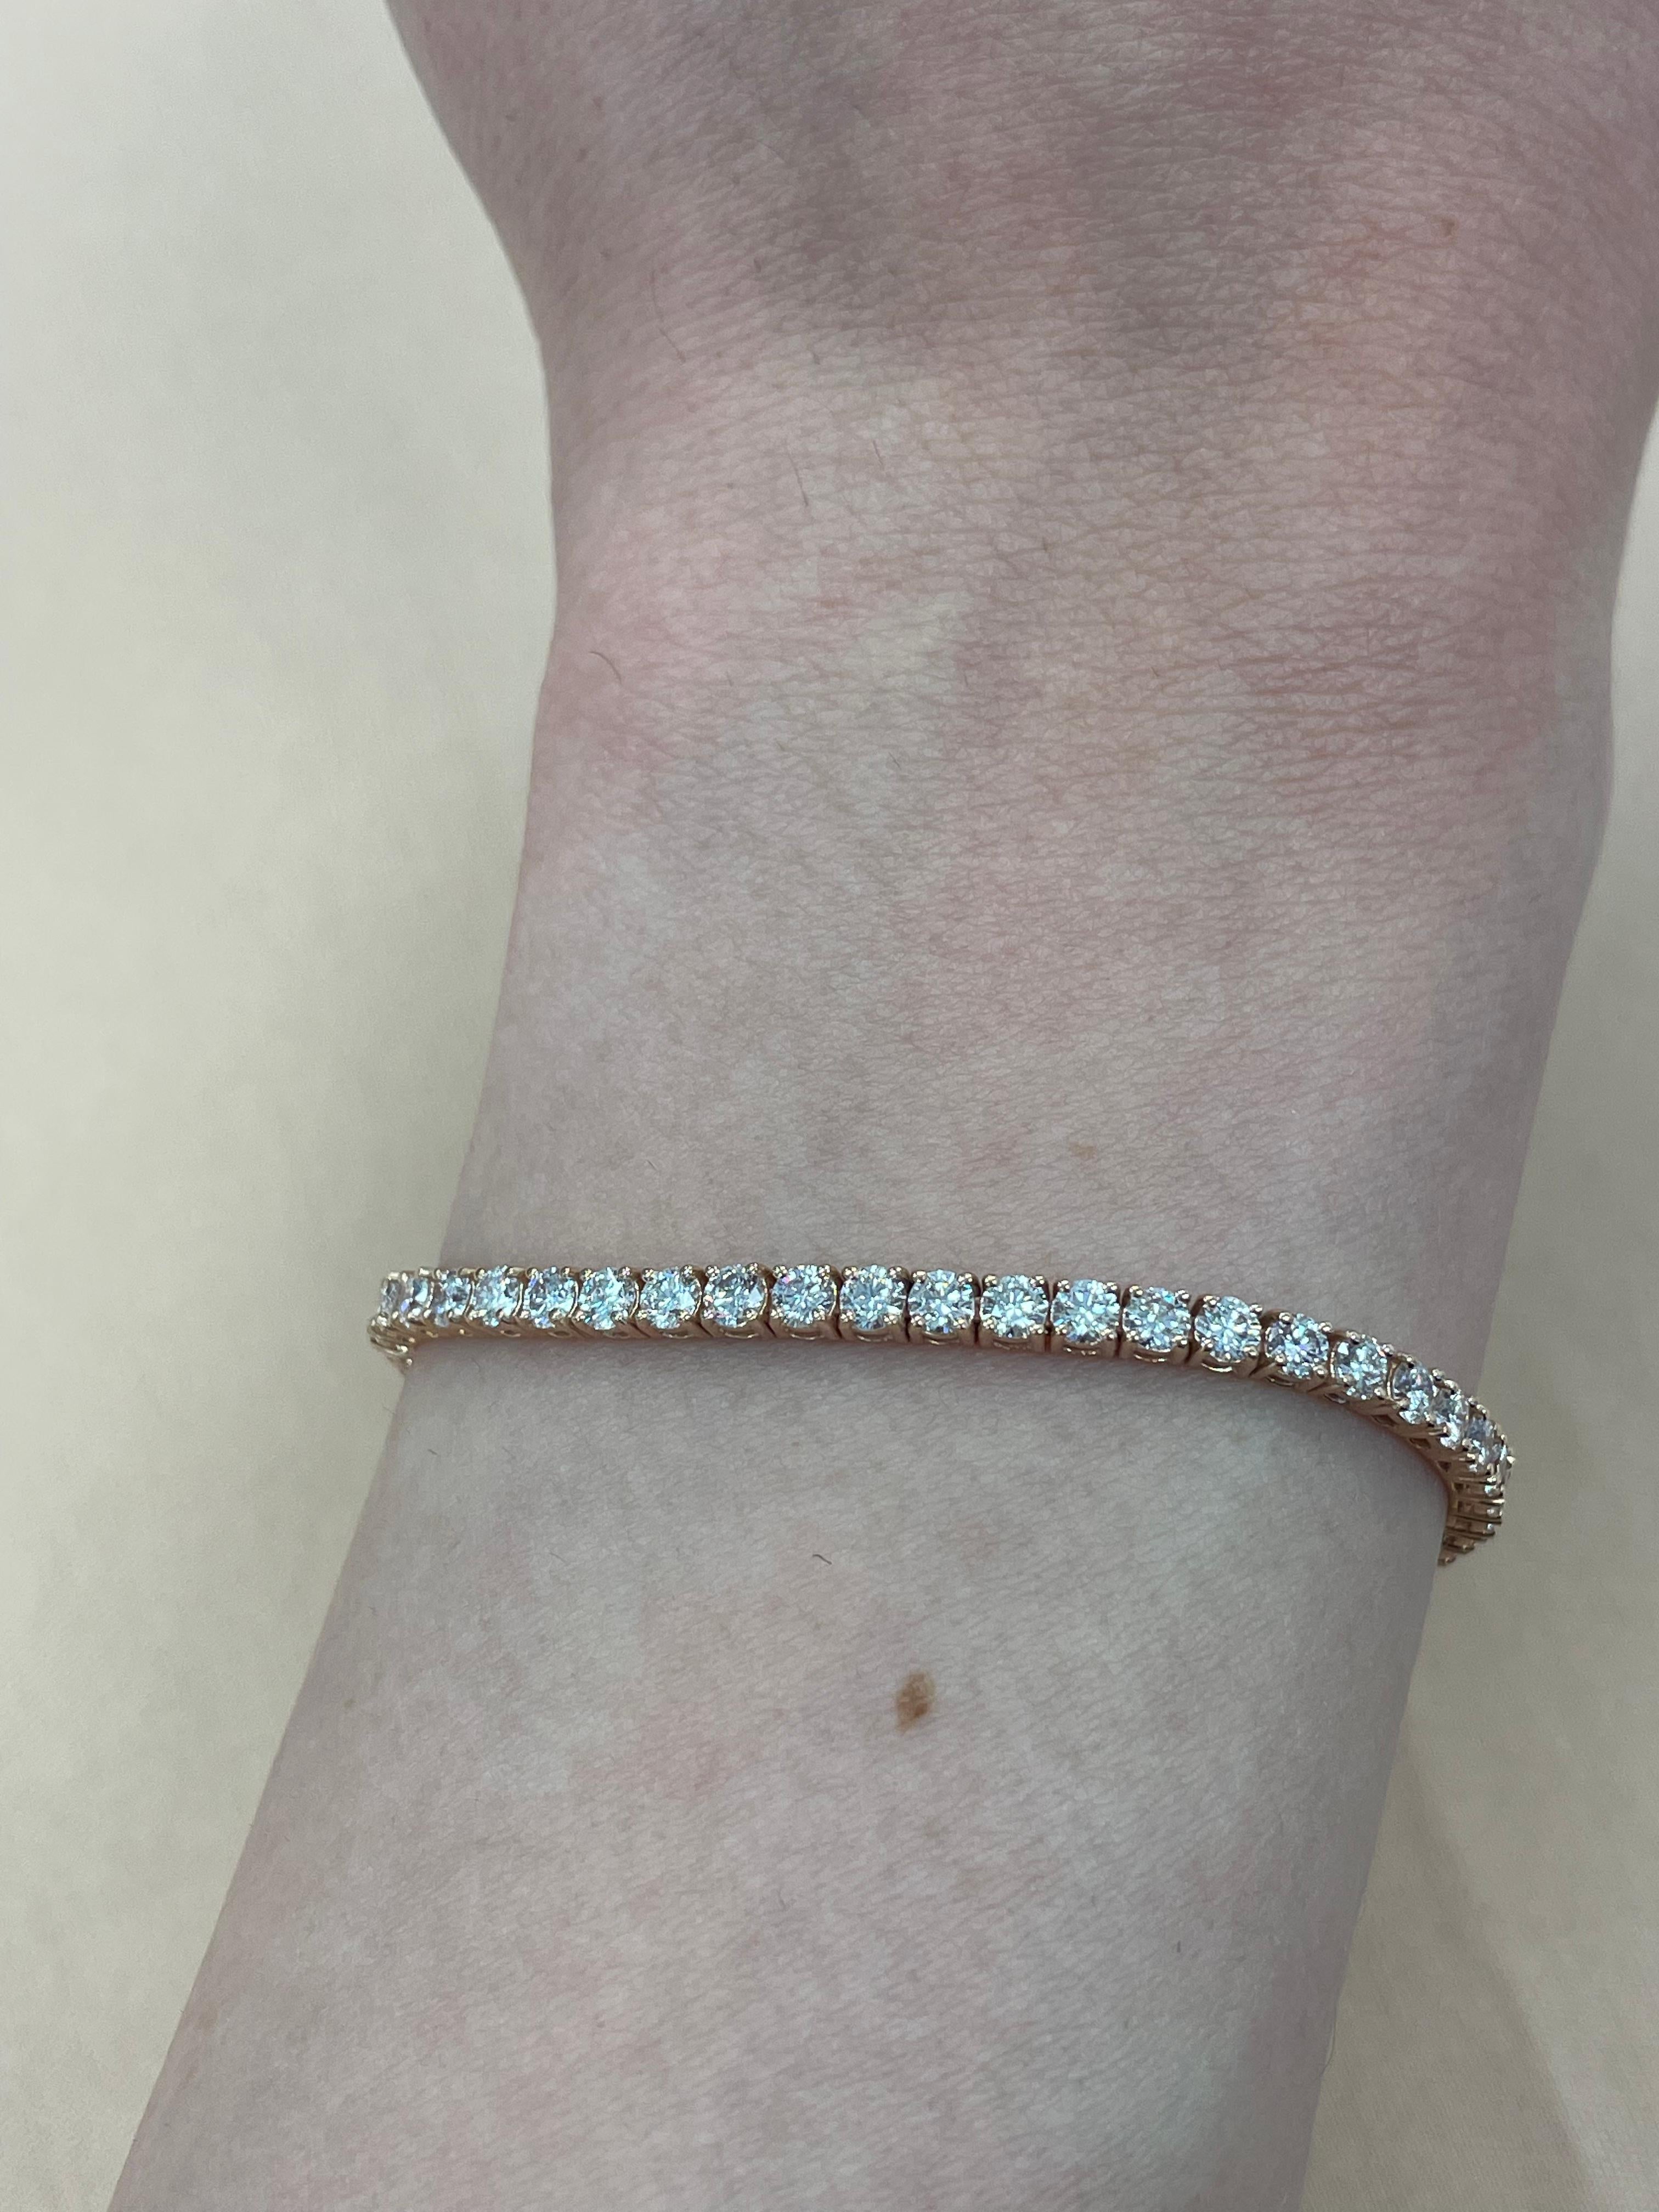 Exquisite and timeless diamonds tennis bracelet, by Alexander Beverly Hills.
62 round brilliant diamonds, 4.69 carats total. Approximately Very Light Pink color (looks like regular white diamonds in mounting) and VS2/SI1 clarity. Four prong set in